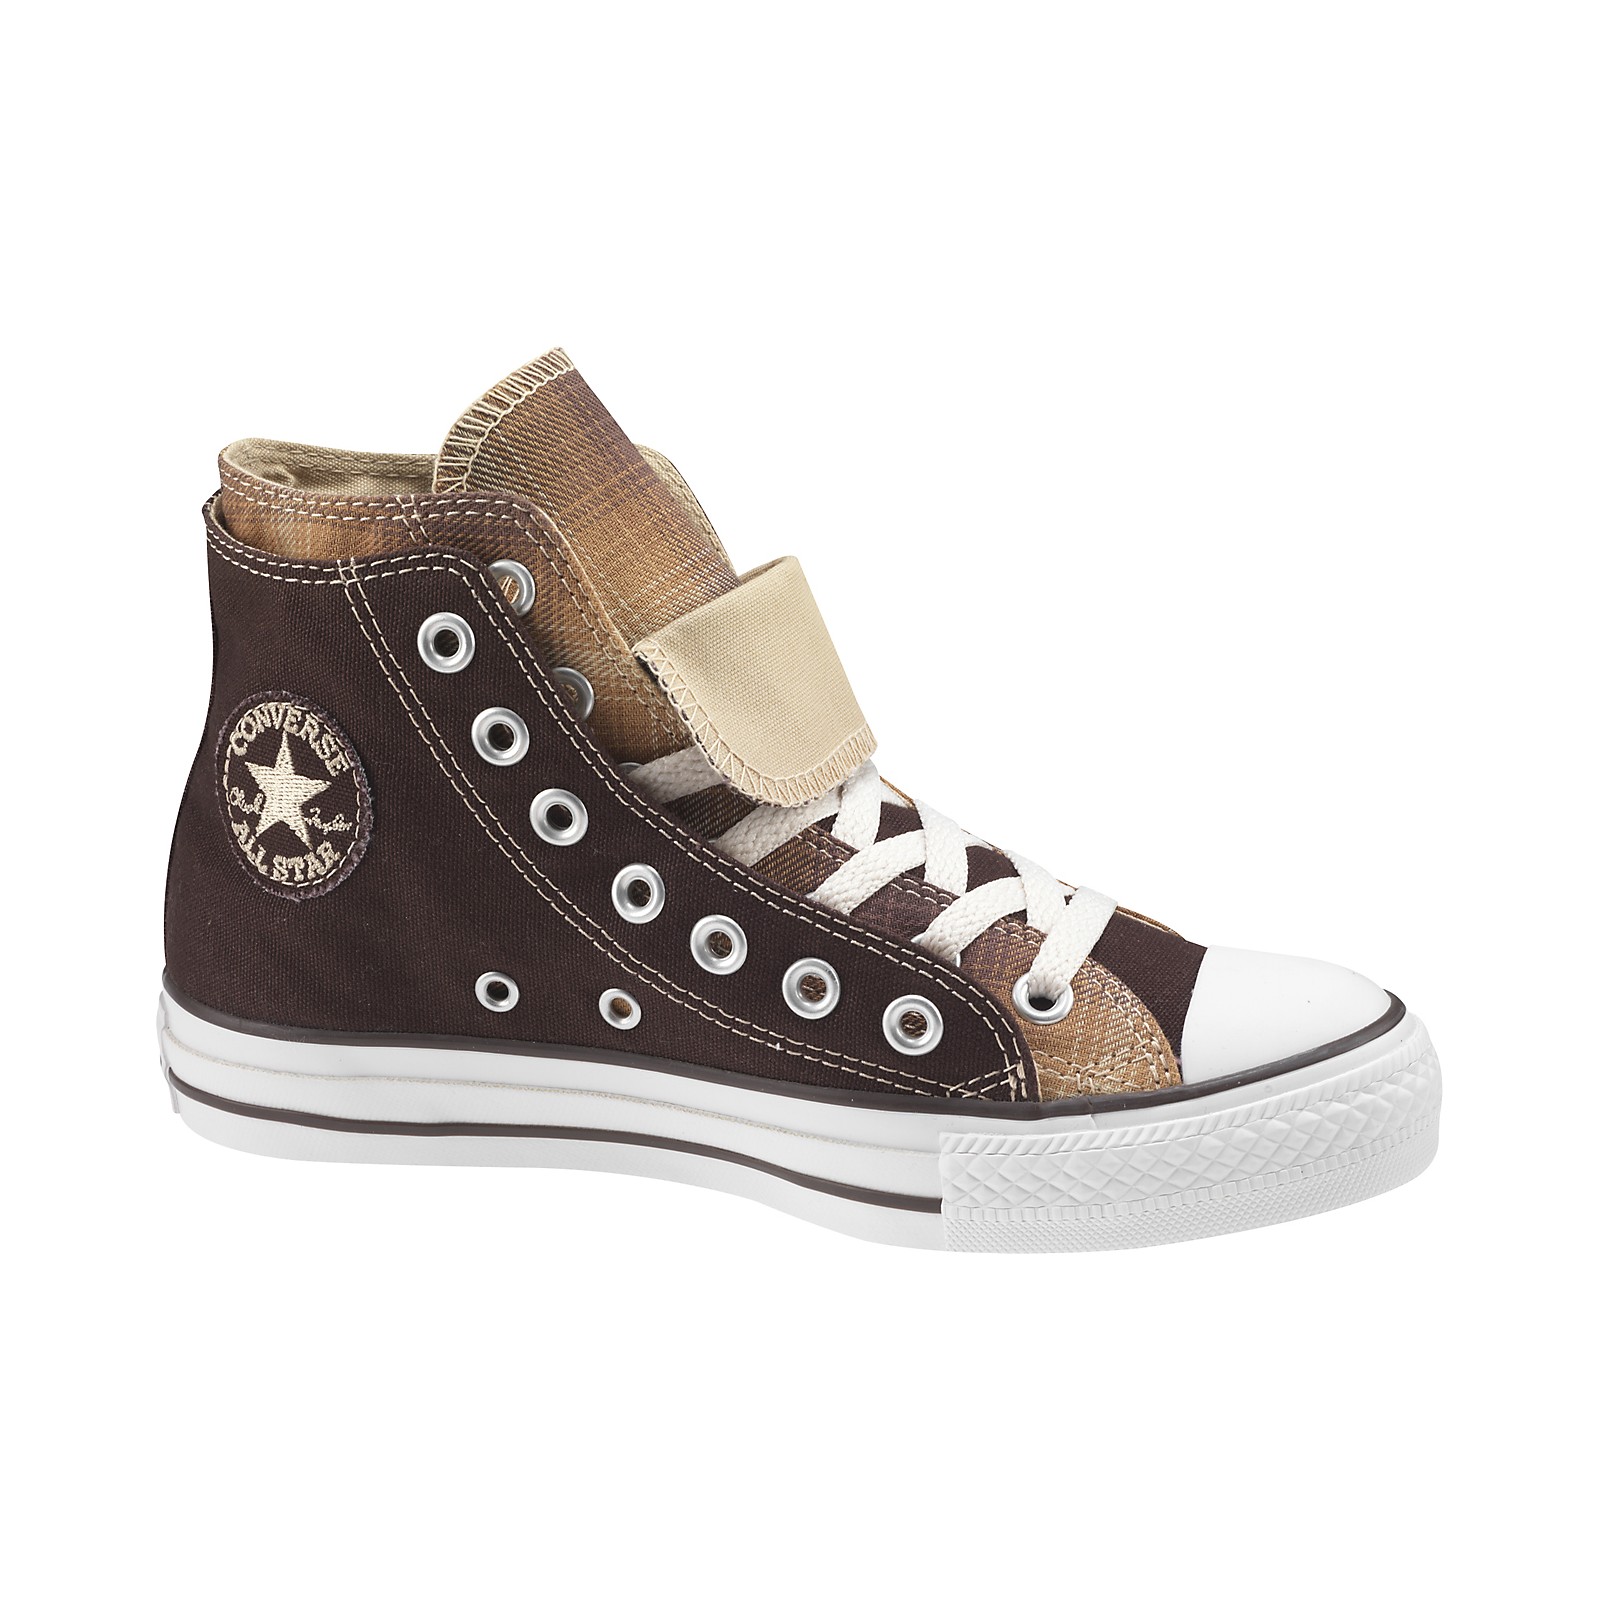 Converse Chuck Taylor All Star Double Upper Hi-Top Sneakers | Musician ...